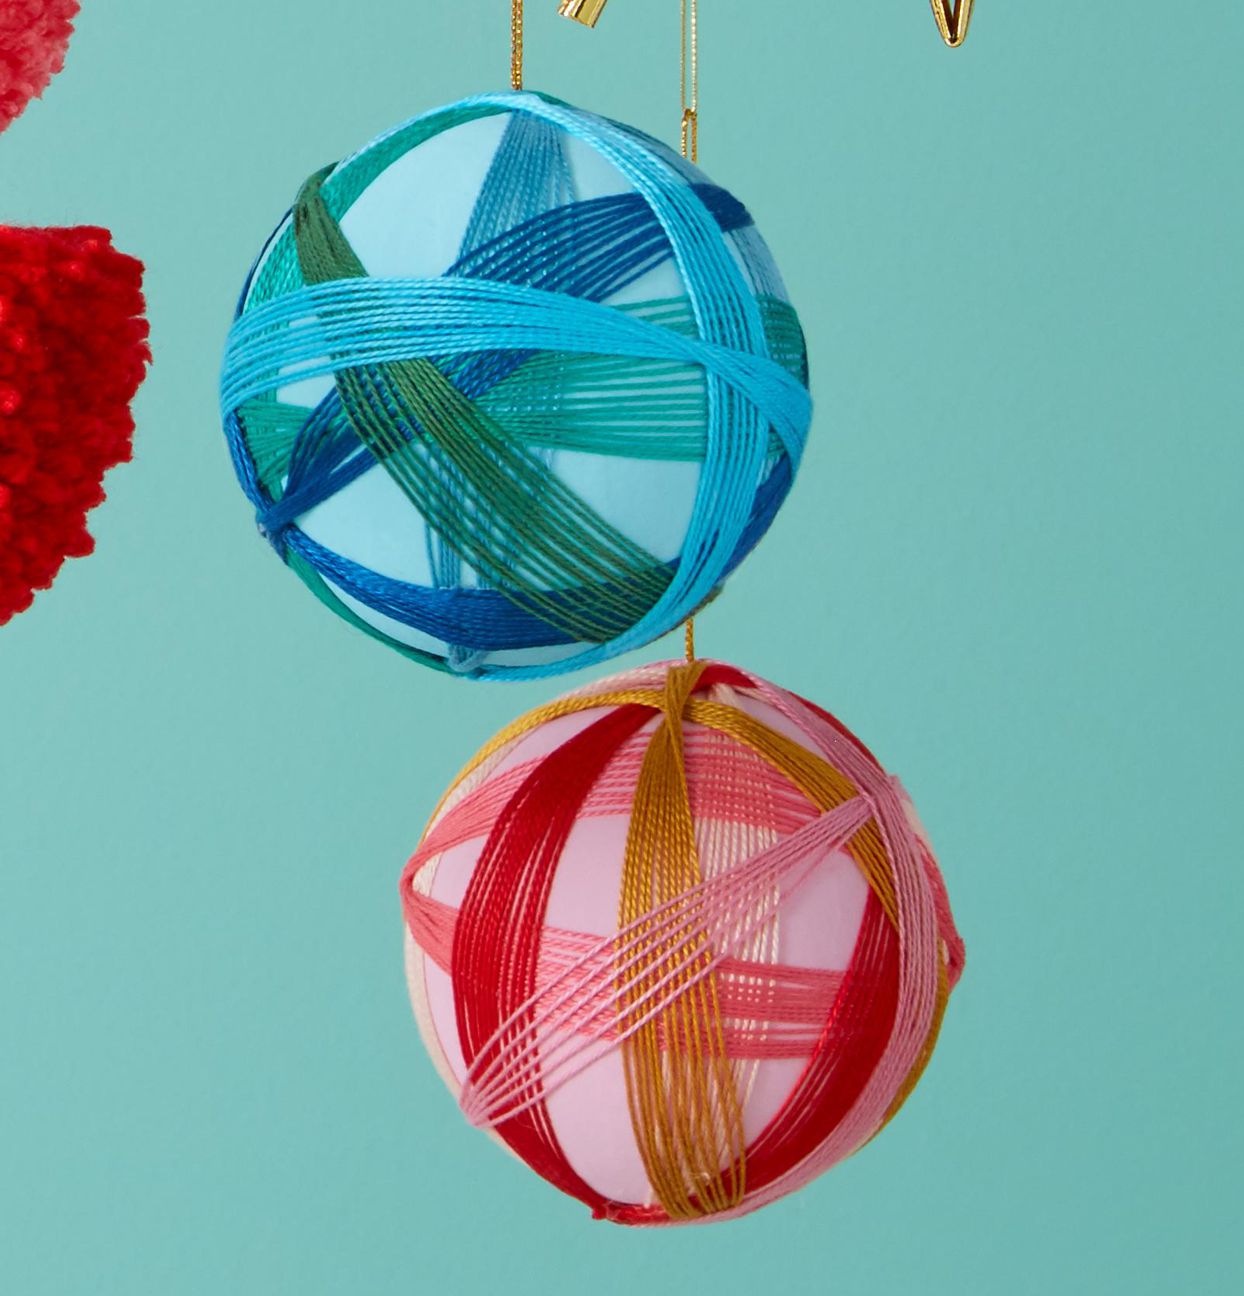 Wrapped Ornament